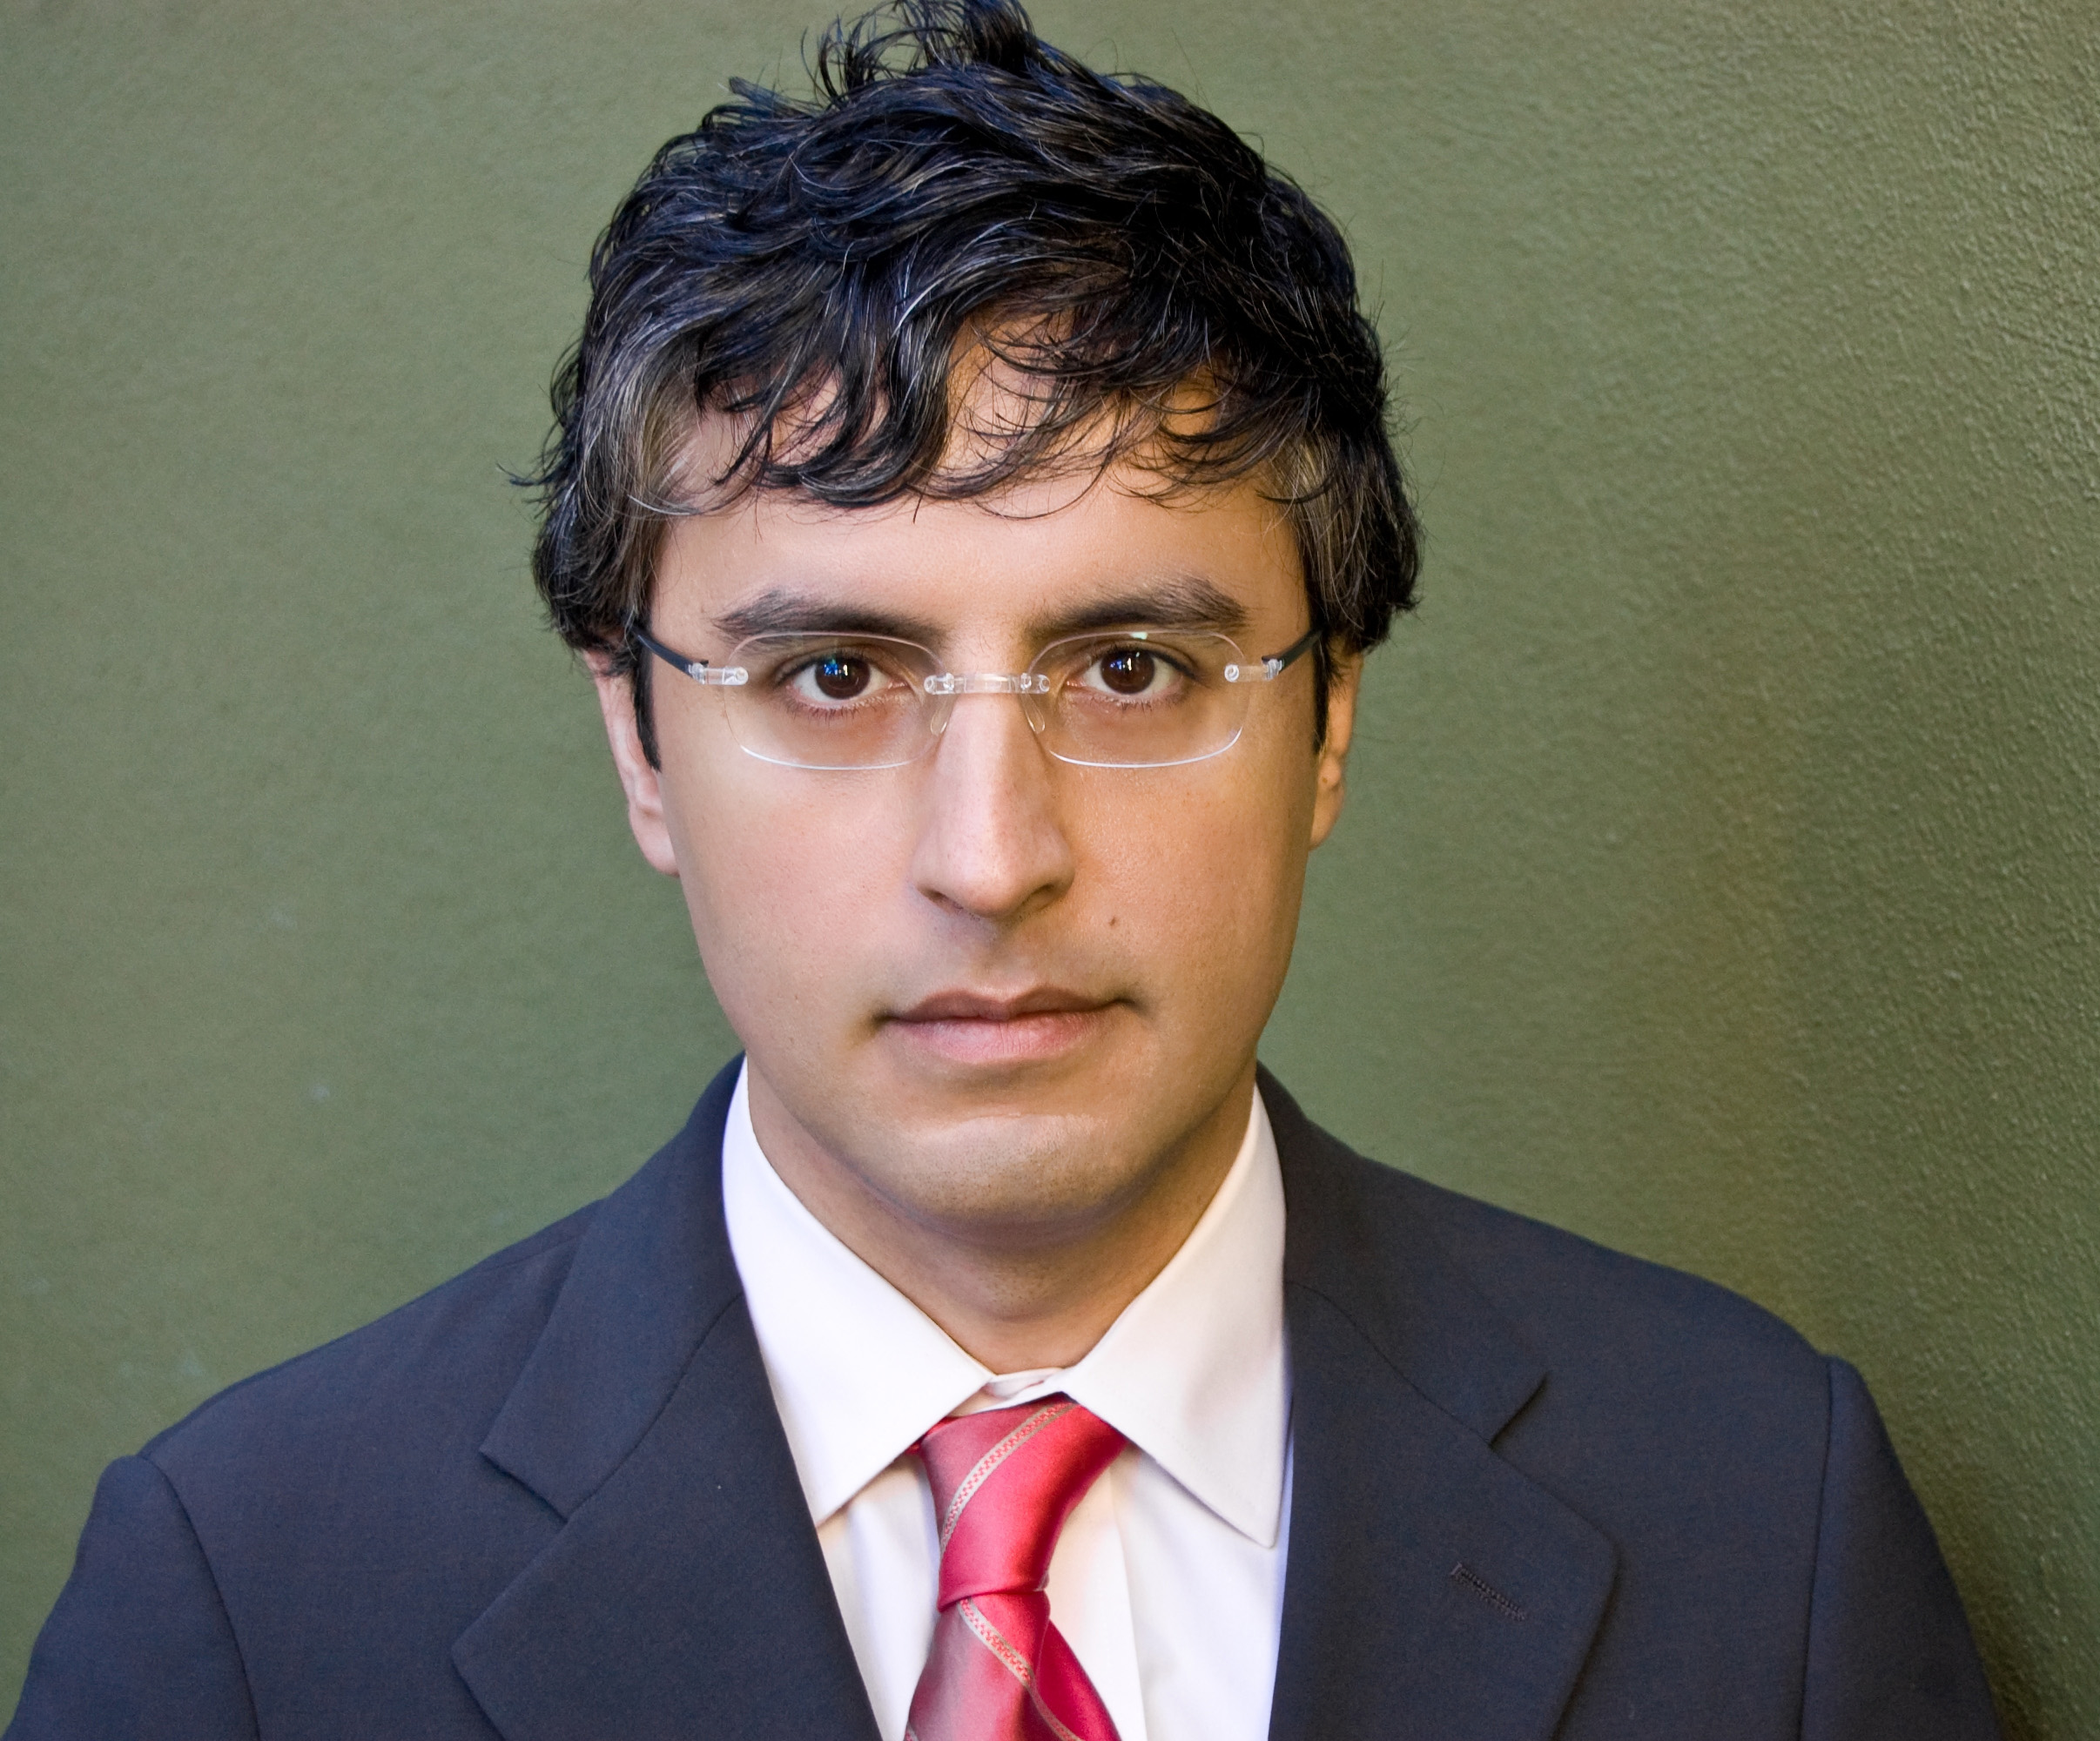 Acclaimed author Reza Aslan will give this year's Sterling M. McMurrin Lecture on Religion and Culture on Monday, Oct. 25 at 7 p.m. in the Salt Lake City Main Library's Nancy Tessman auditorium.